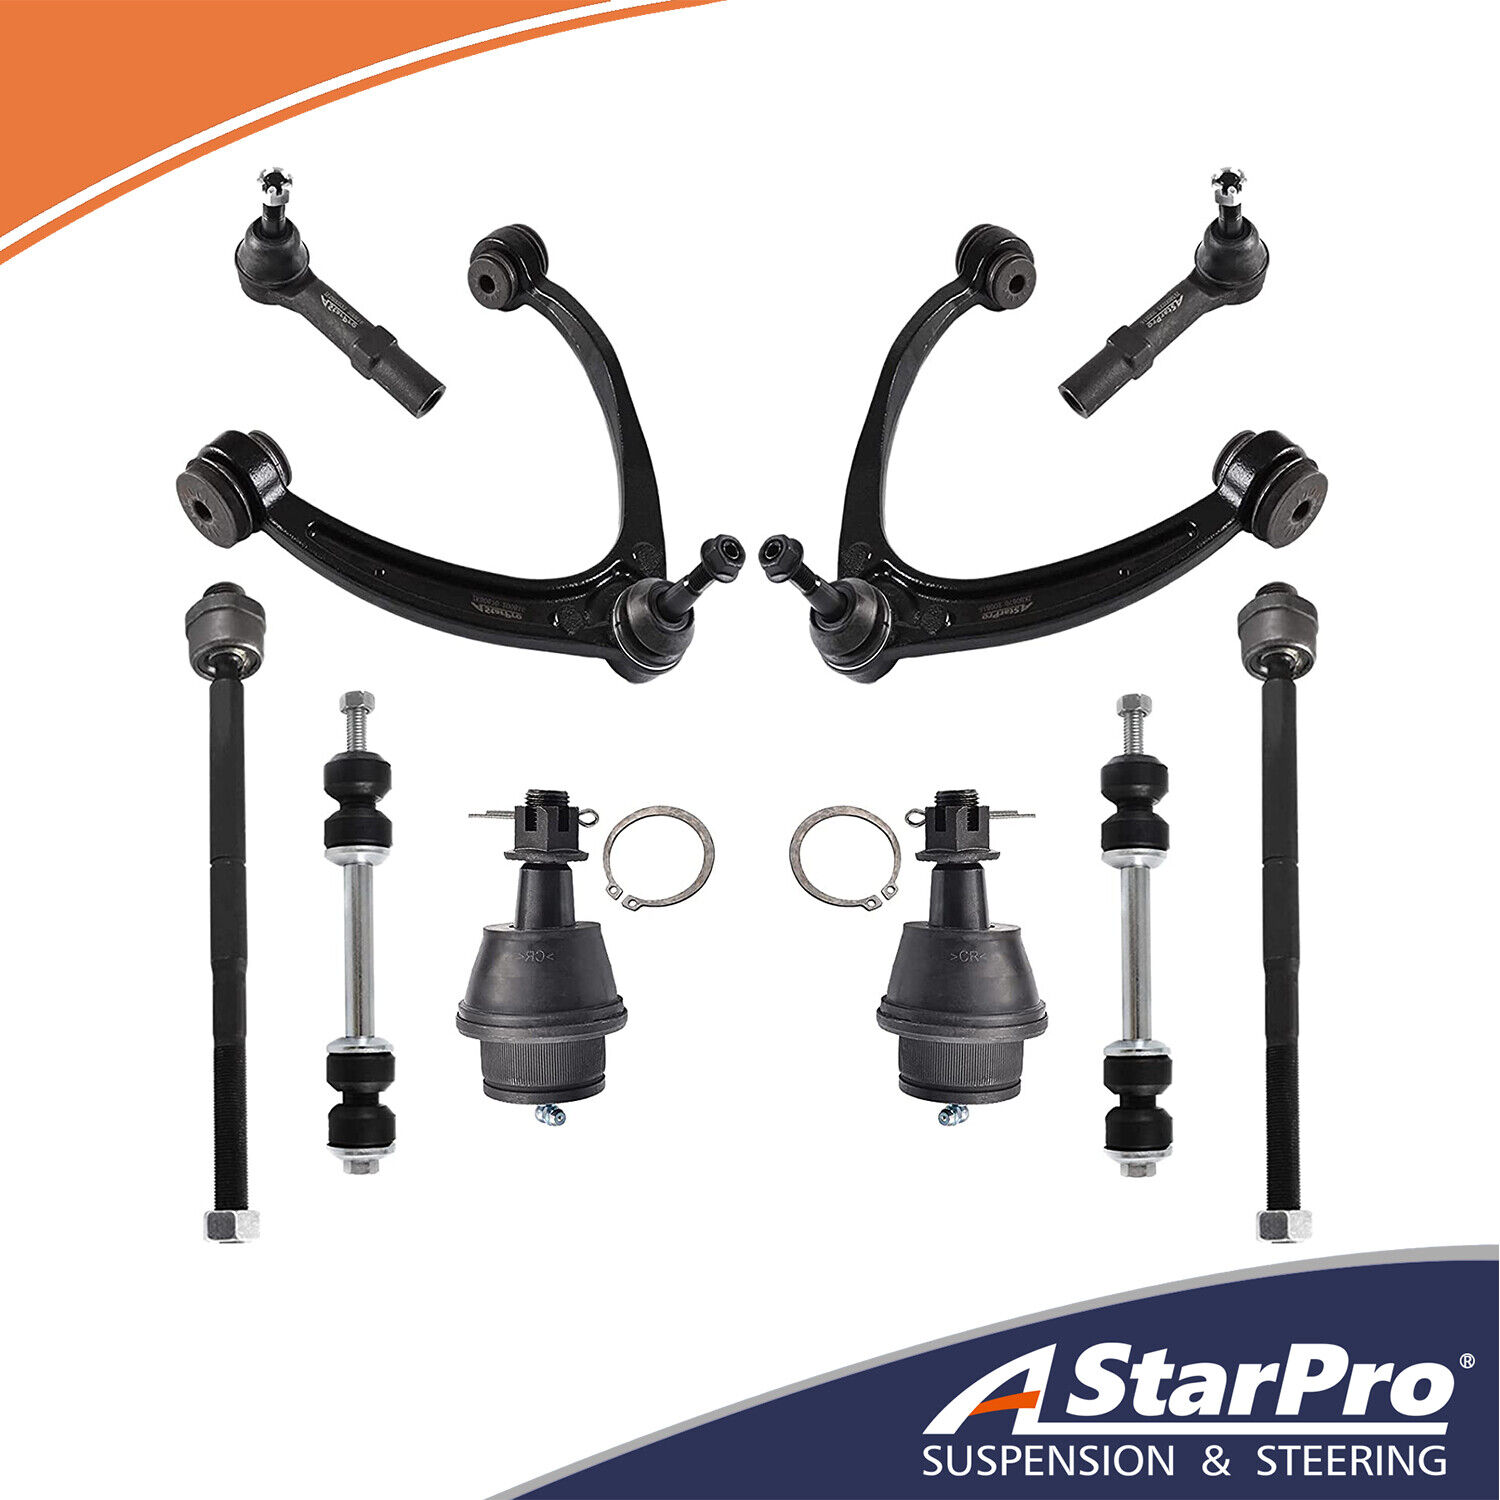 10pc Front Upper Control Arms Ball Joints for Chevy Silverado GMC Sierra 1500